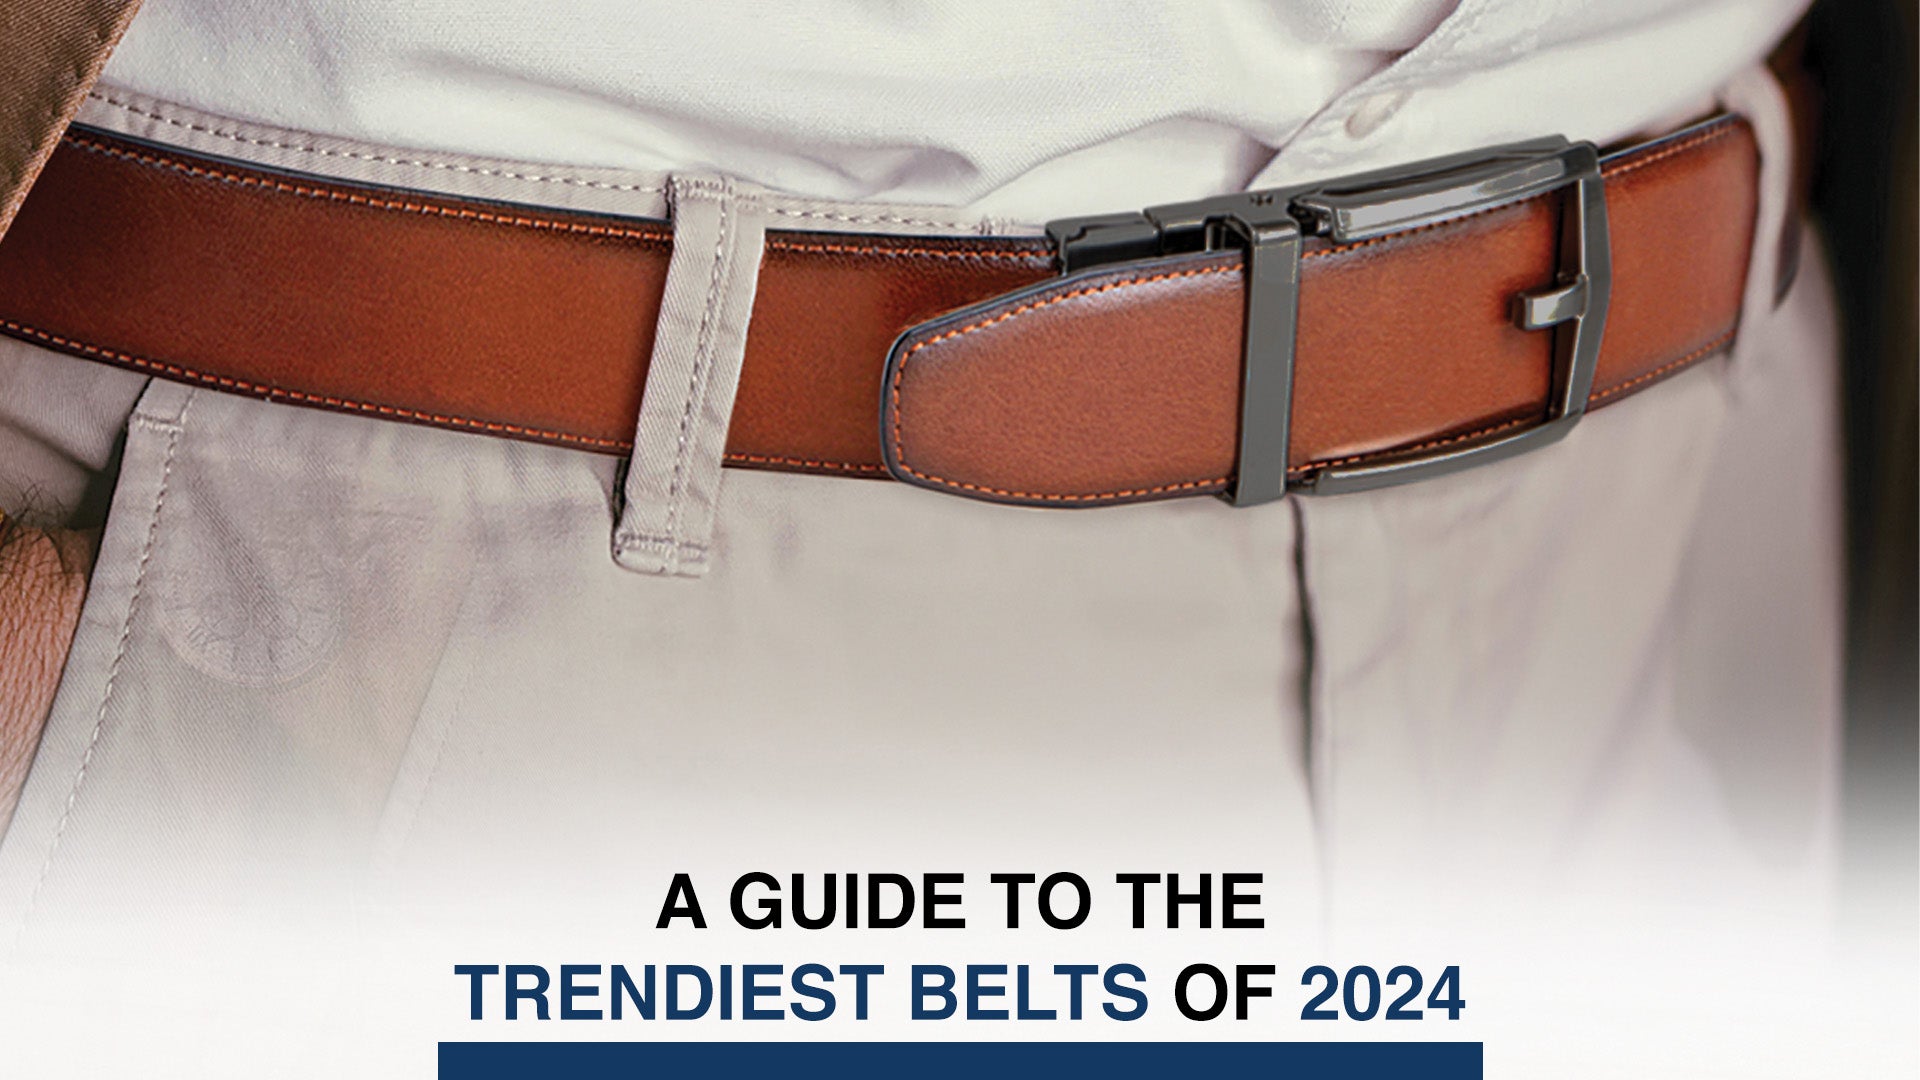 A Guide to the Trendiest Belts of 2024